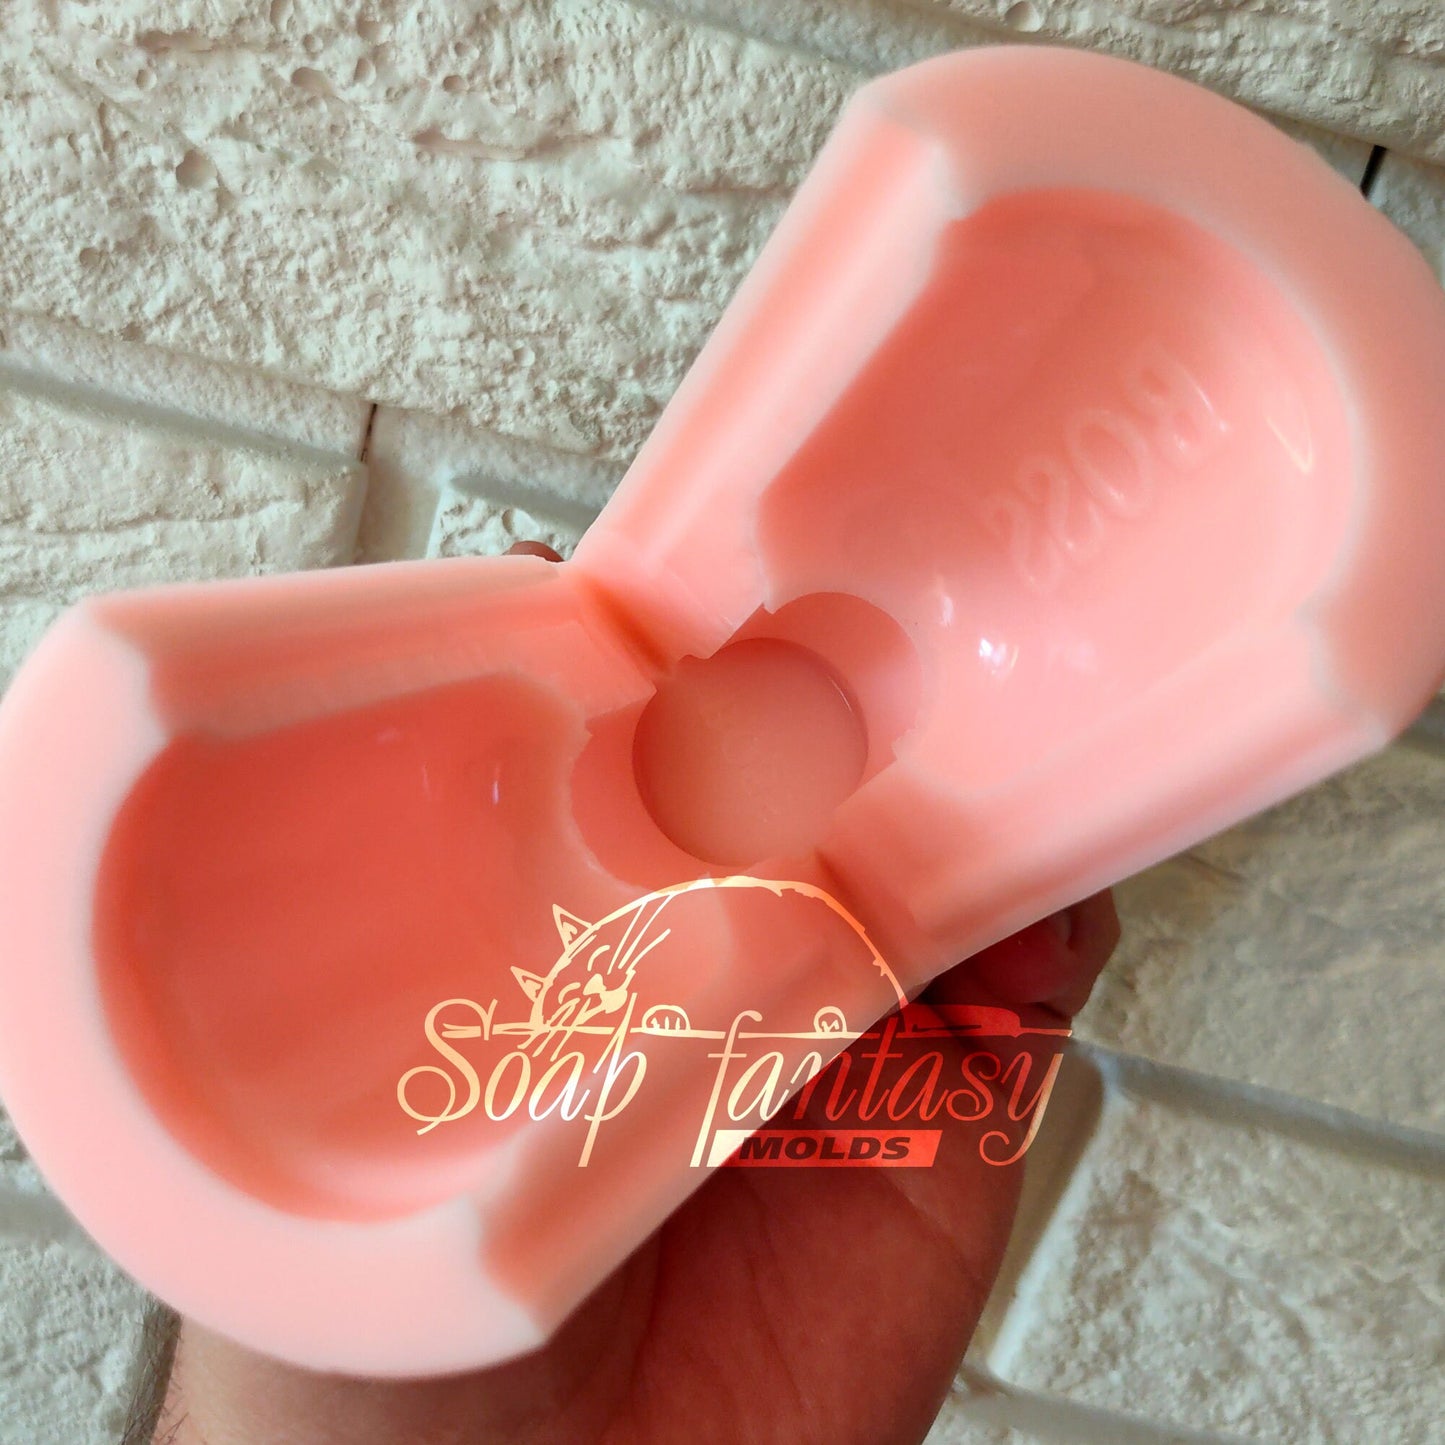 Men's perfume silicone mold for soap making